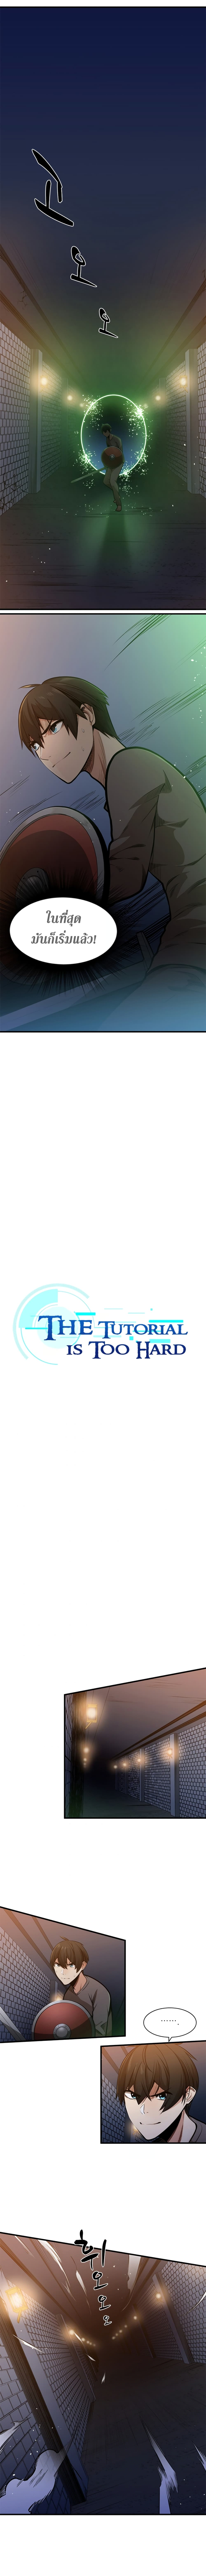 The Tutorial is Too Hard 4-4